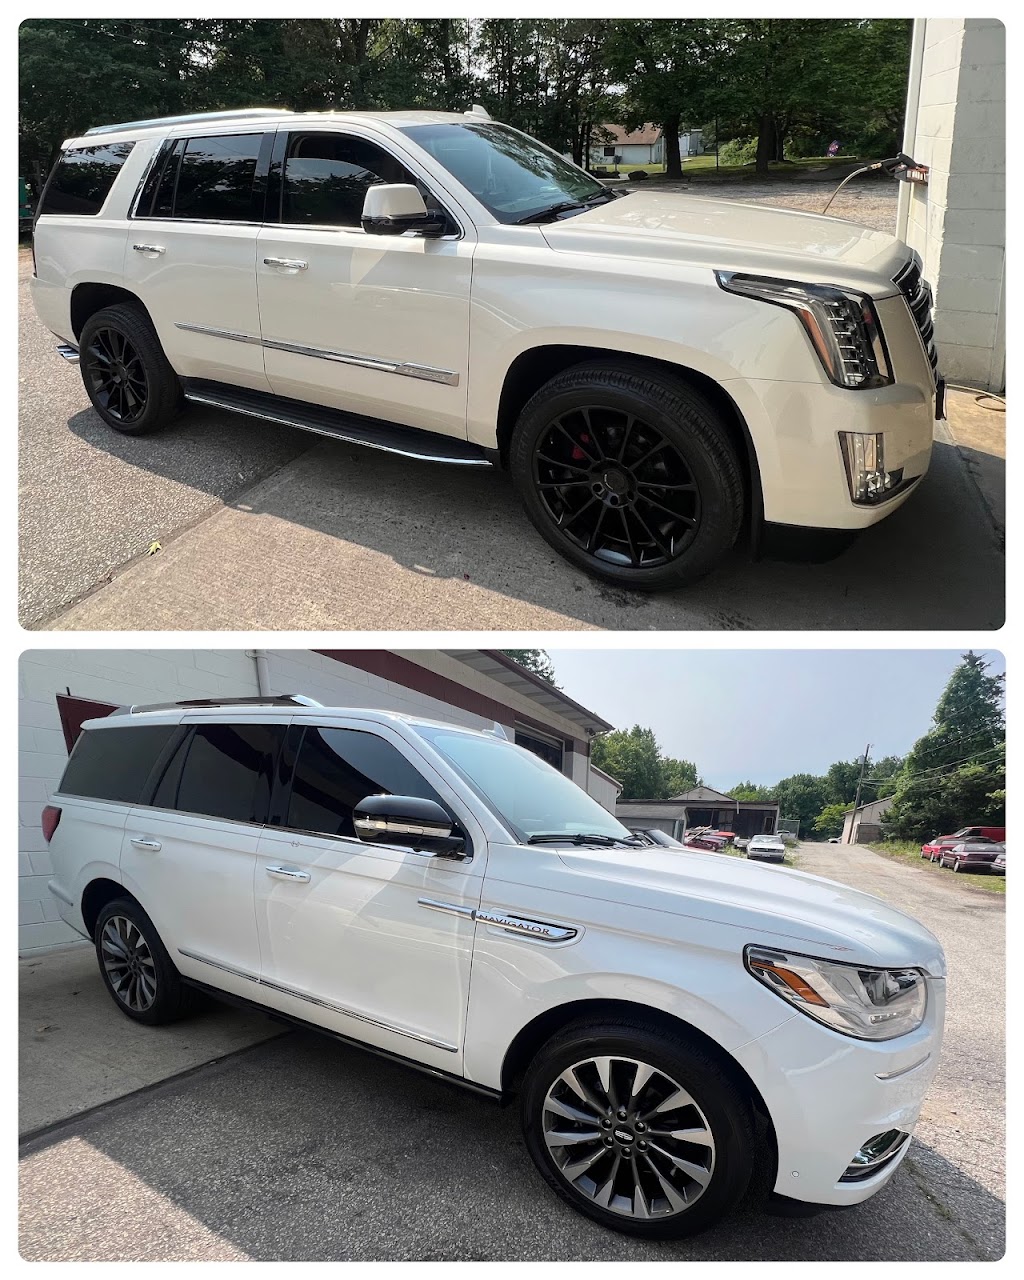 A Touch of Class Auto Detailing | 138 Blackwood Barnsboro Rd, Sewell, NJ 08080 | Phone: (856) 693-9682